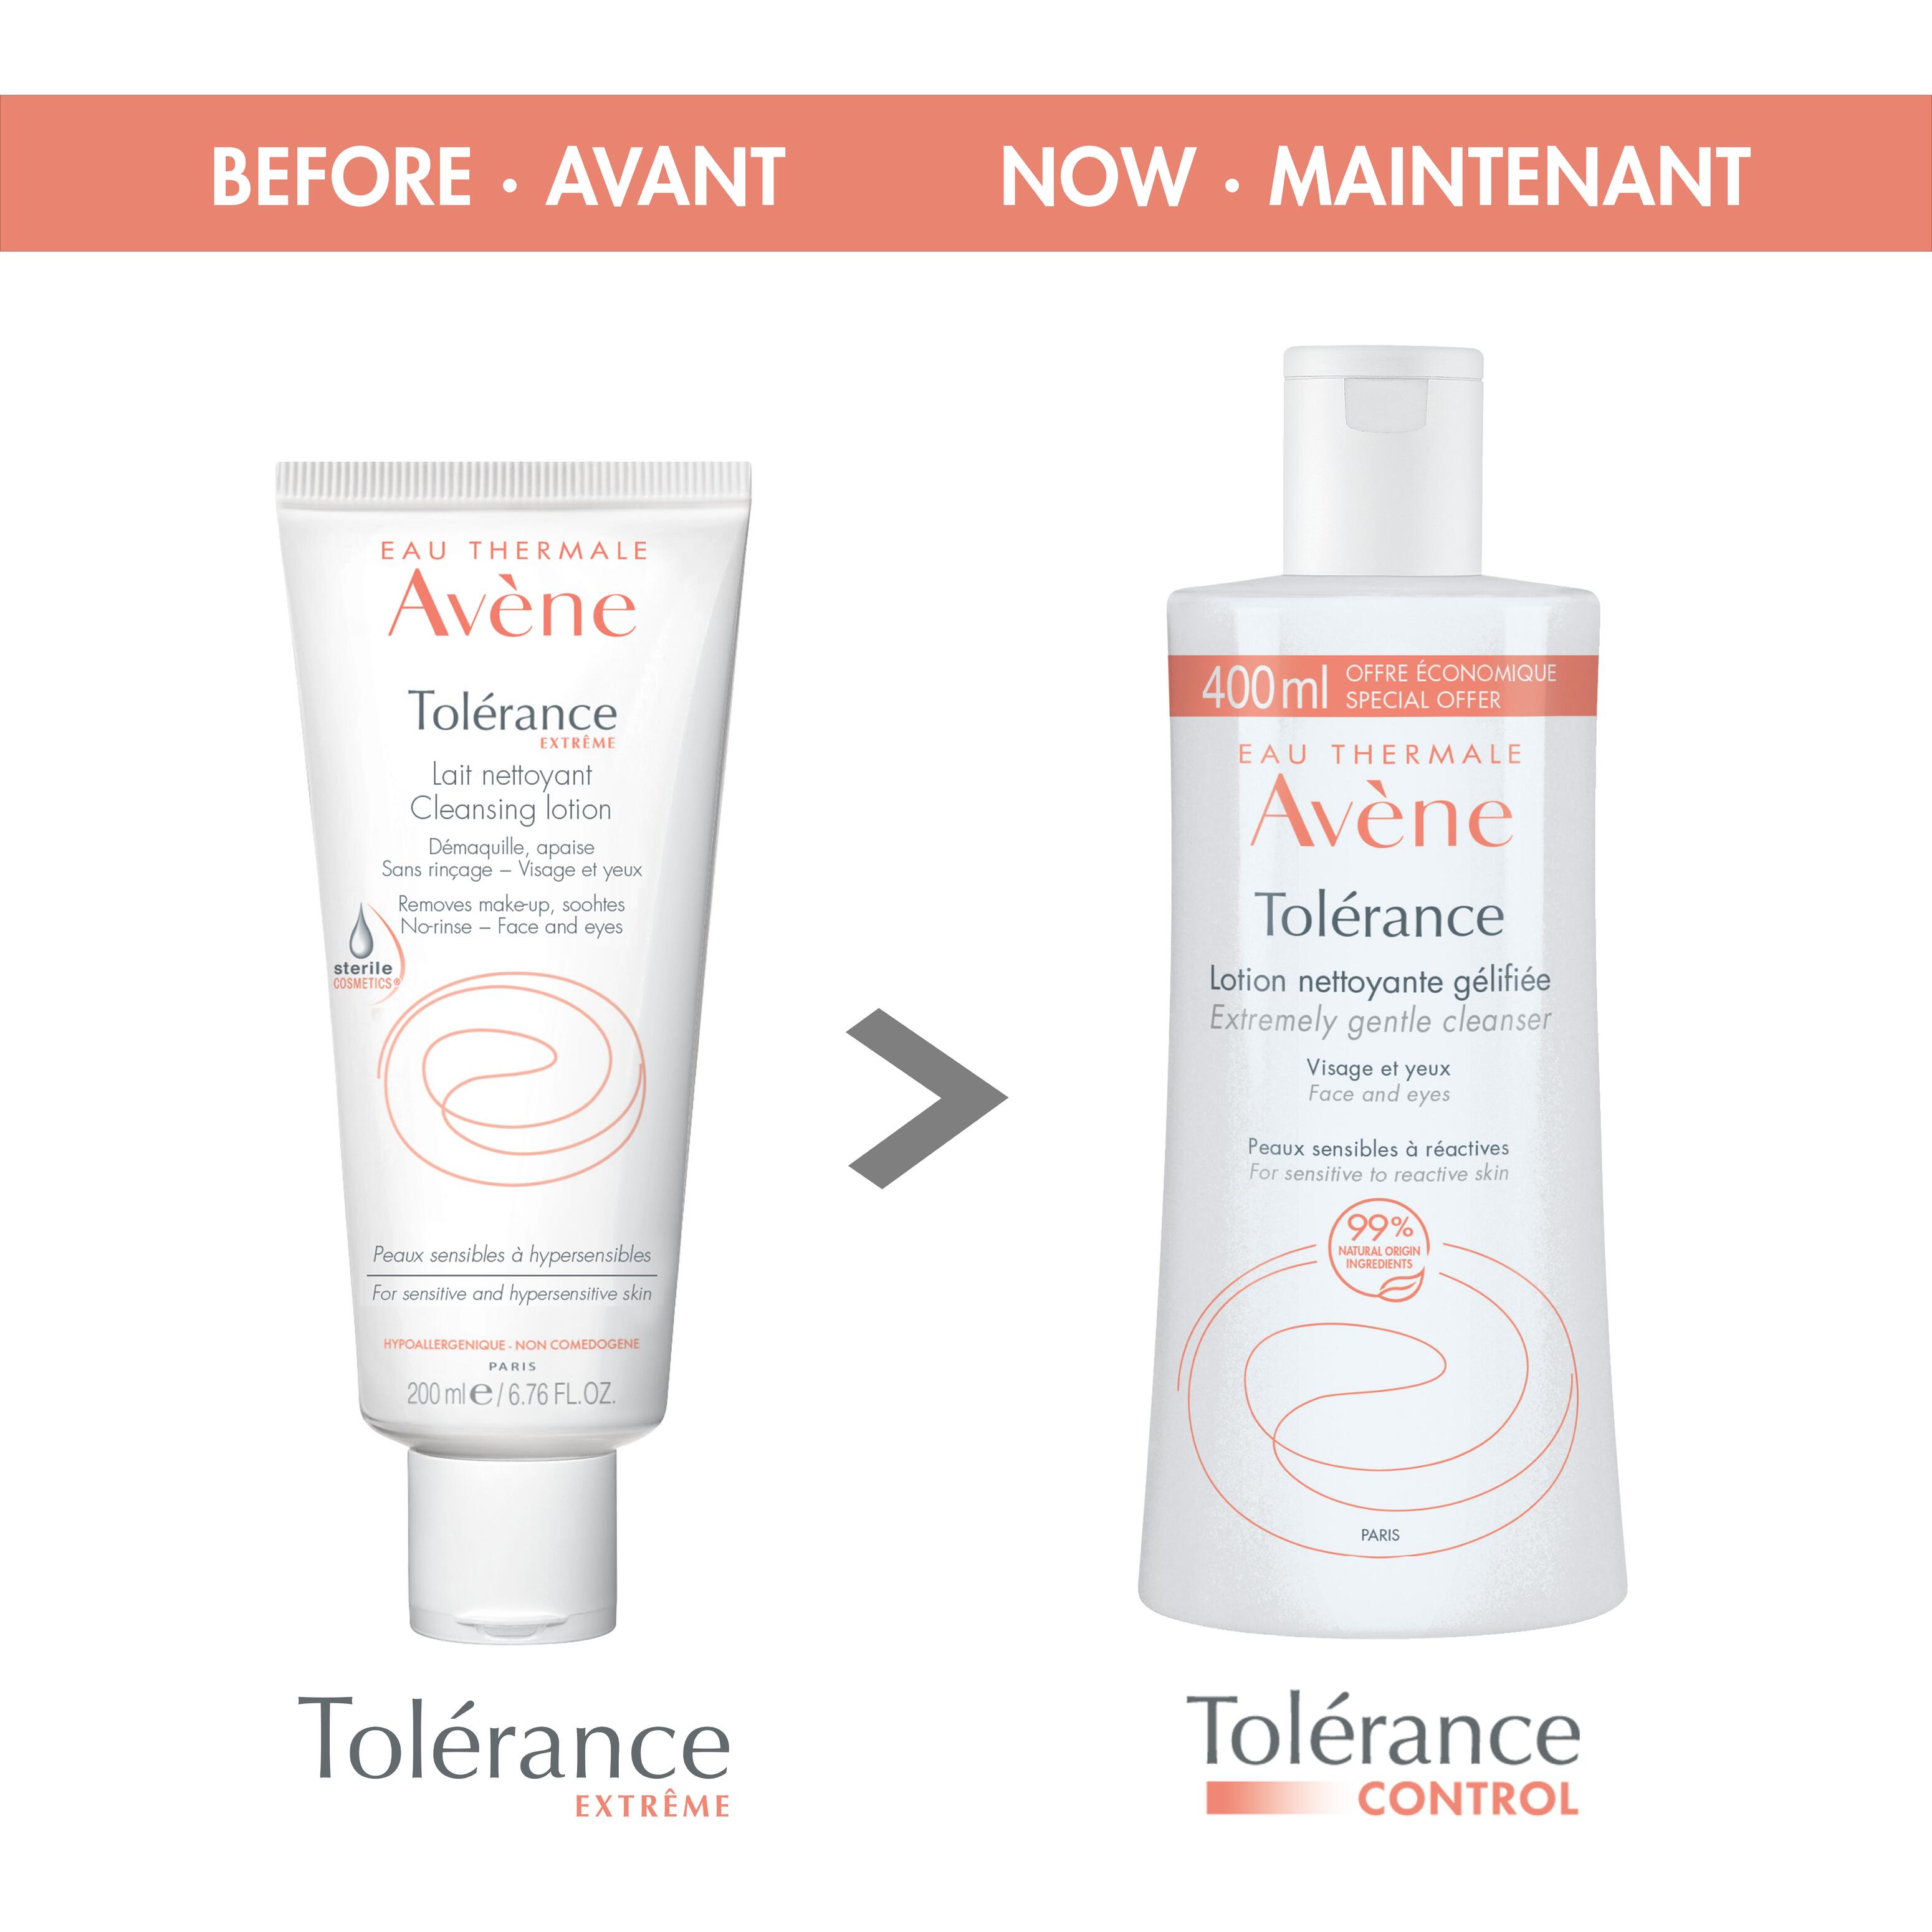 Tolérance Cleansing Lotion Sterile Cosmetics® Eau Thermale Avène